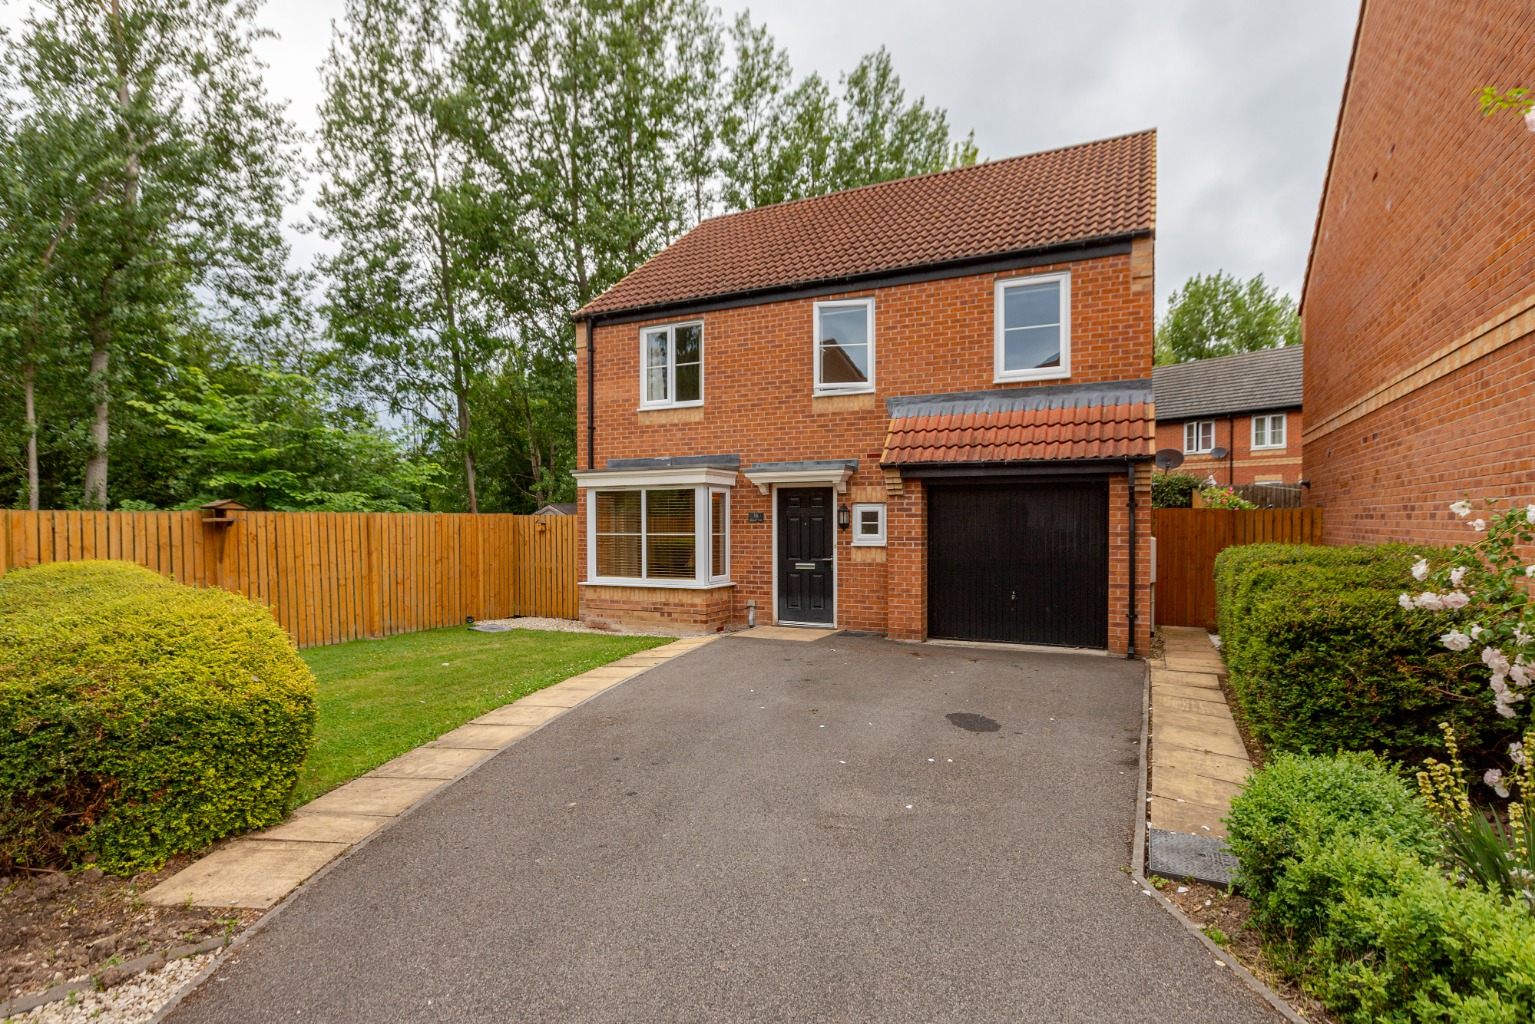 4 bed detached house to rent in Bluebell Walk, Catterick Garrison - Property Image 1